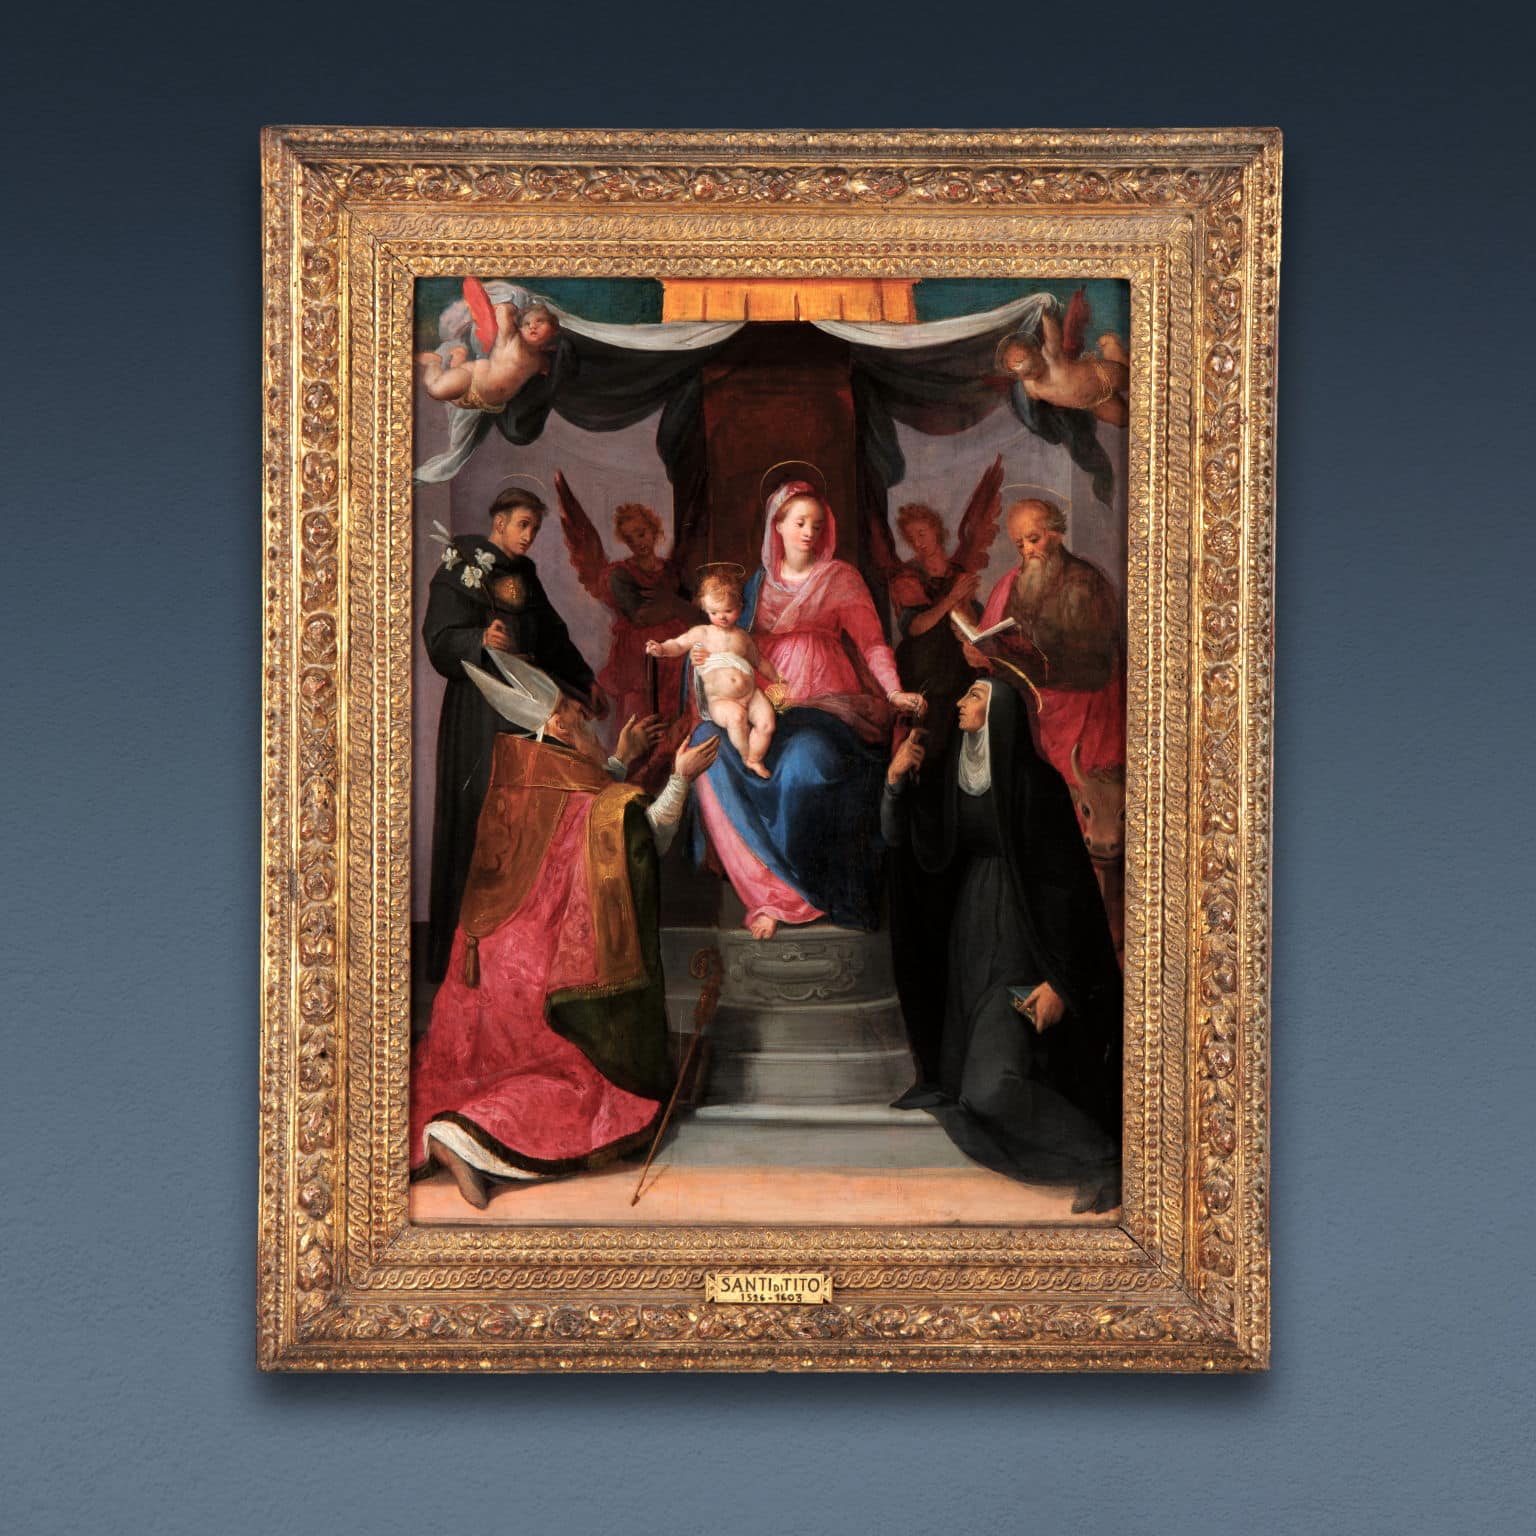 Enthroned Madonna with Child between Angels and Saints Nicholas of Tolentino